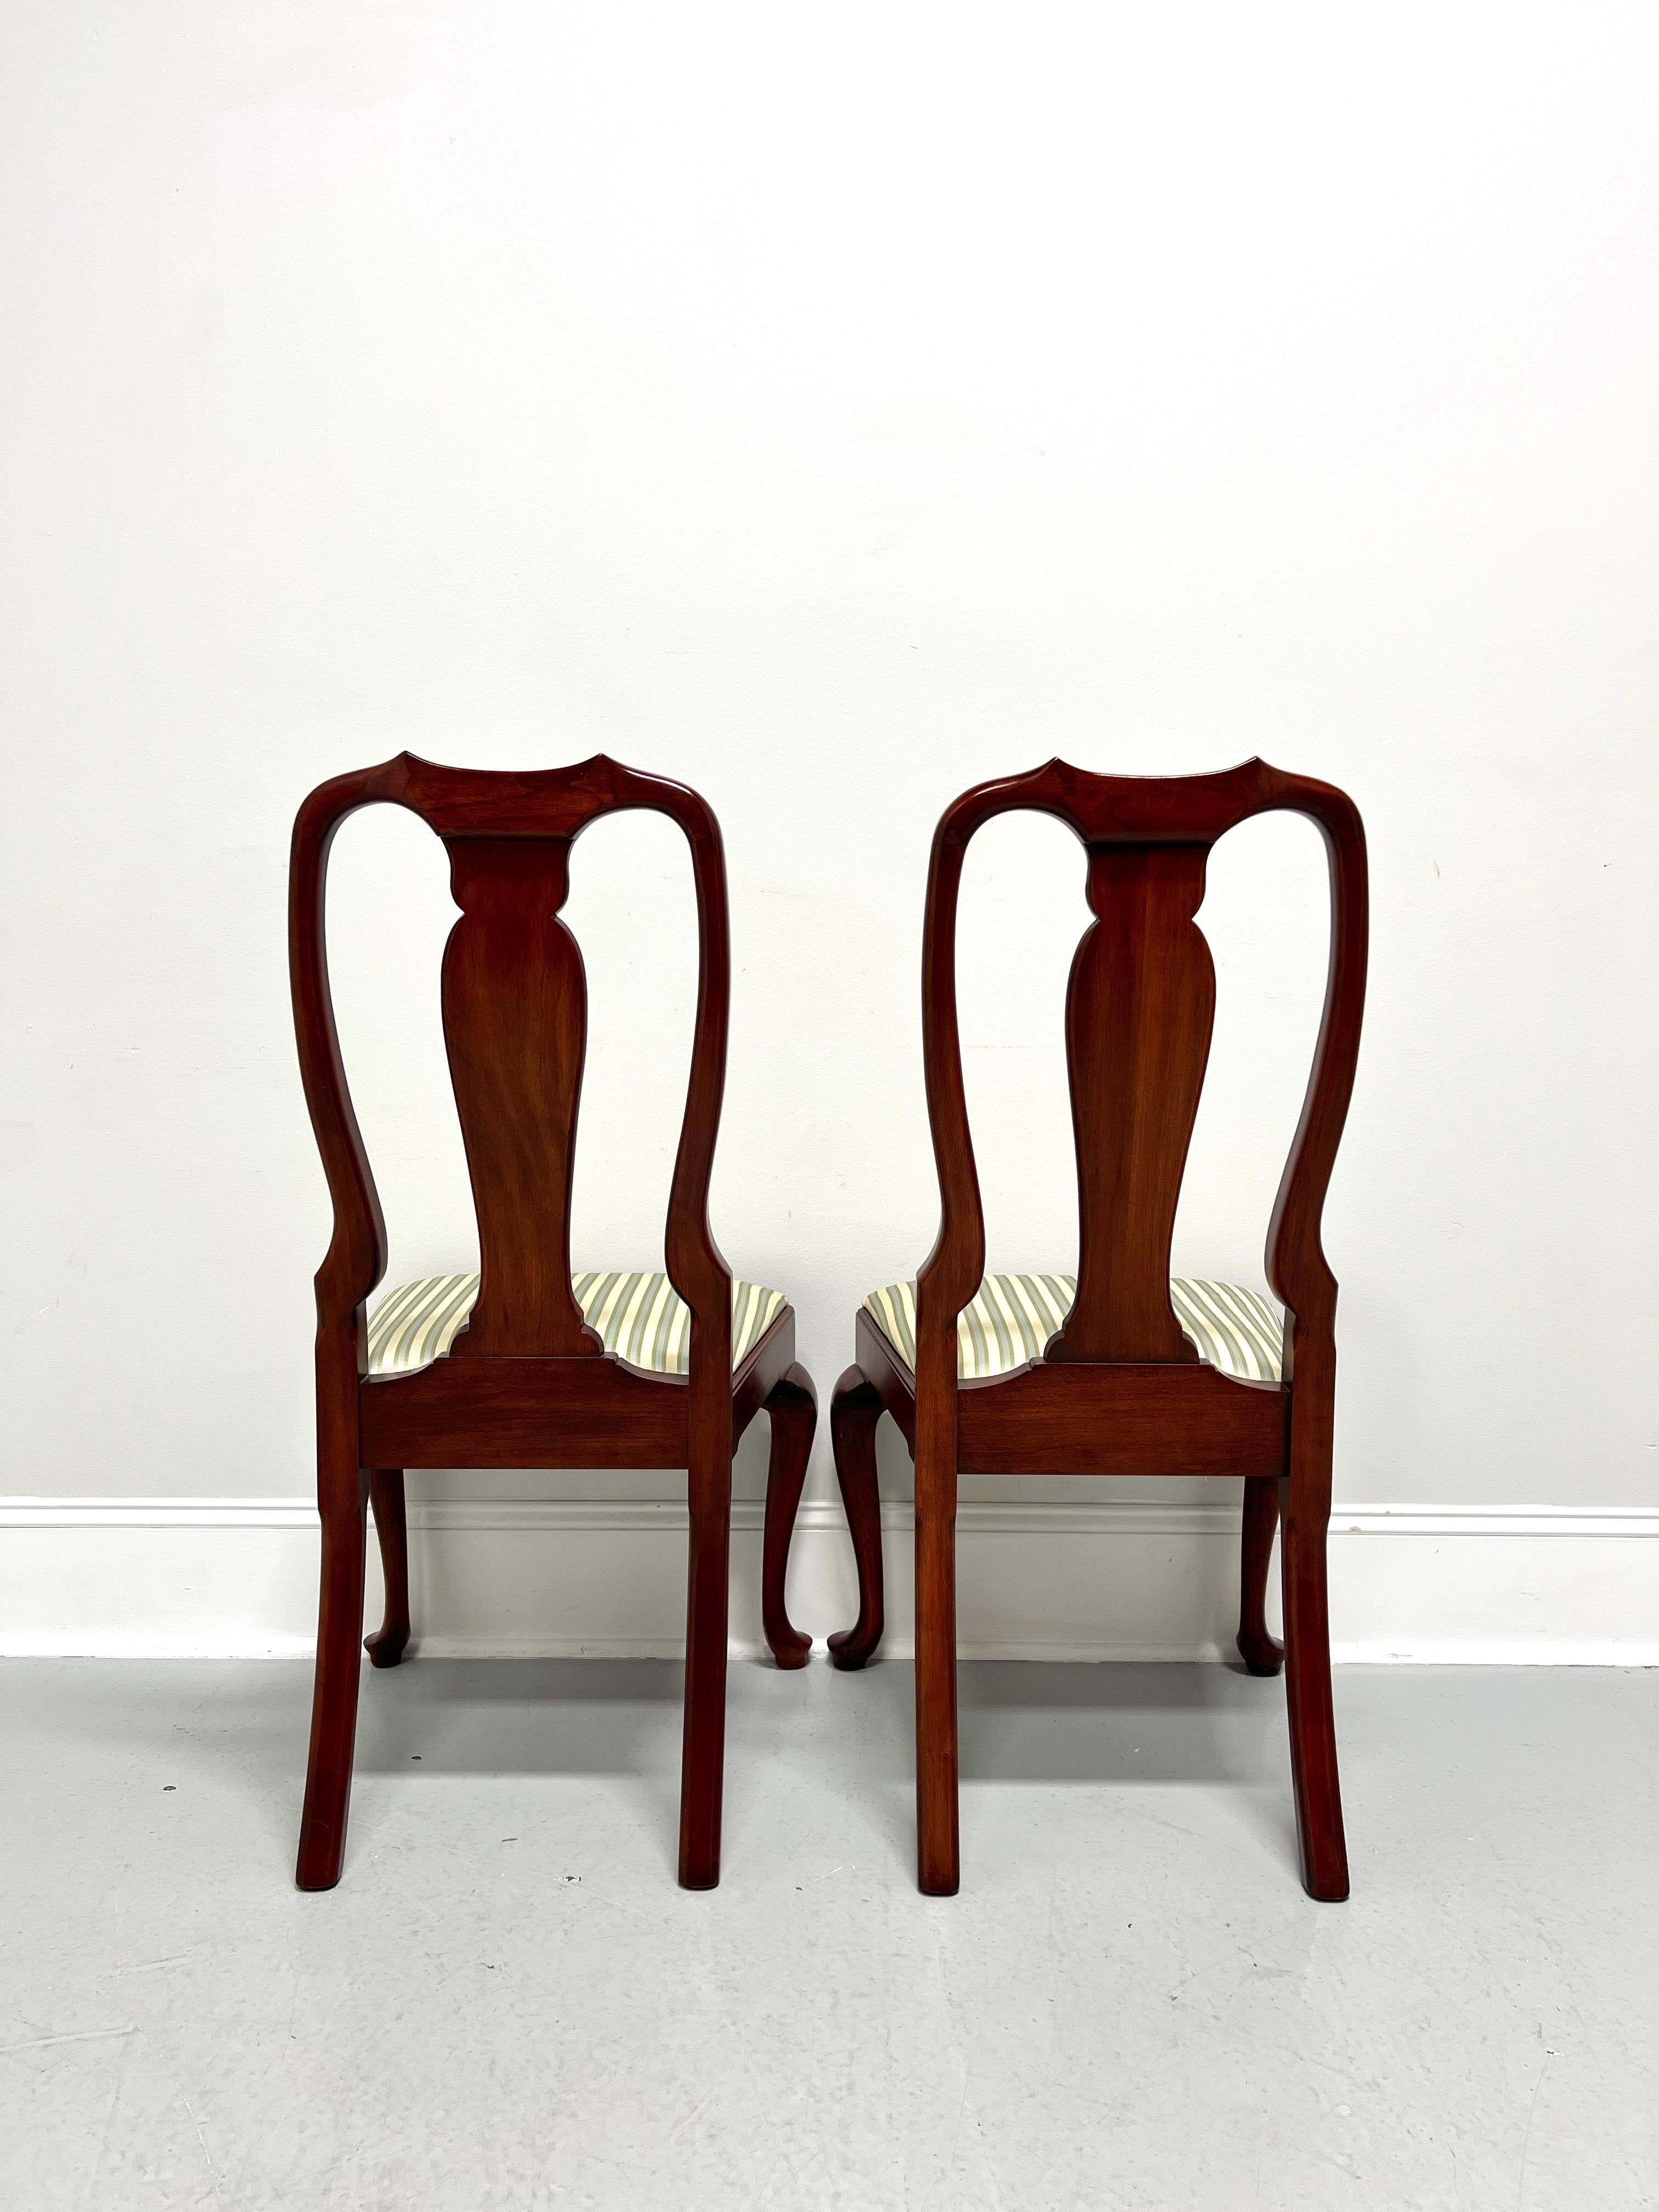 HENKEL HARRIS 105S 24 Wild Black Cherry Queen Anne Dining Side Chairs - Pair A In Good Condition For Sale In Charlotte, NC